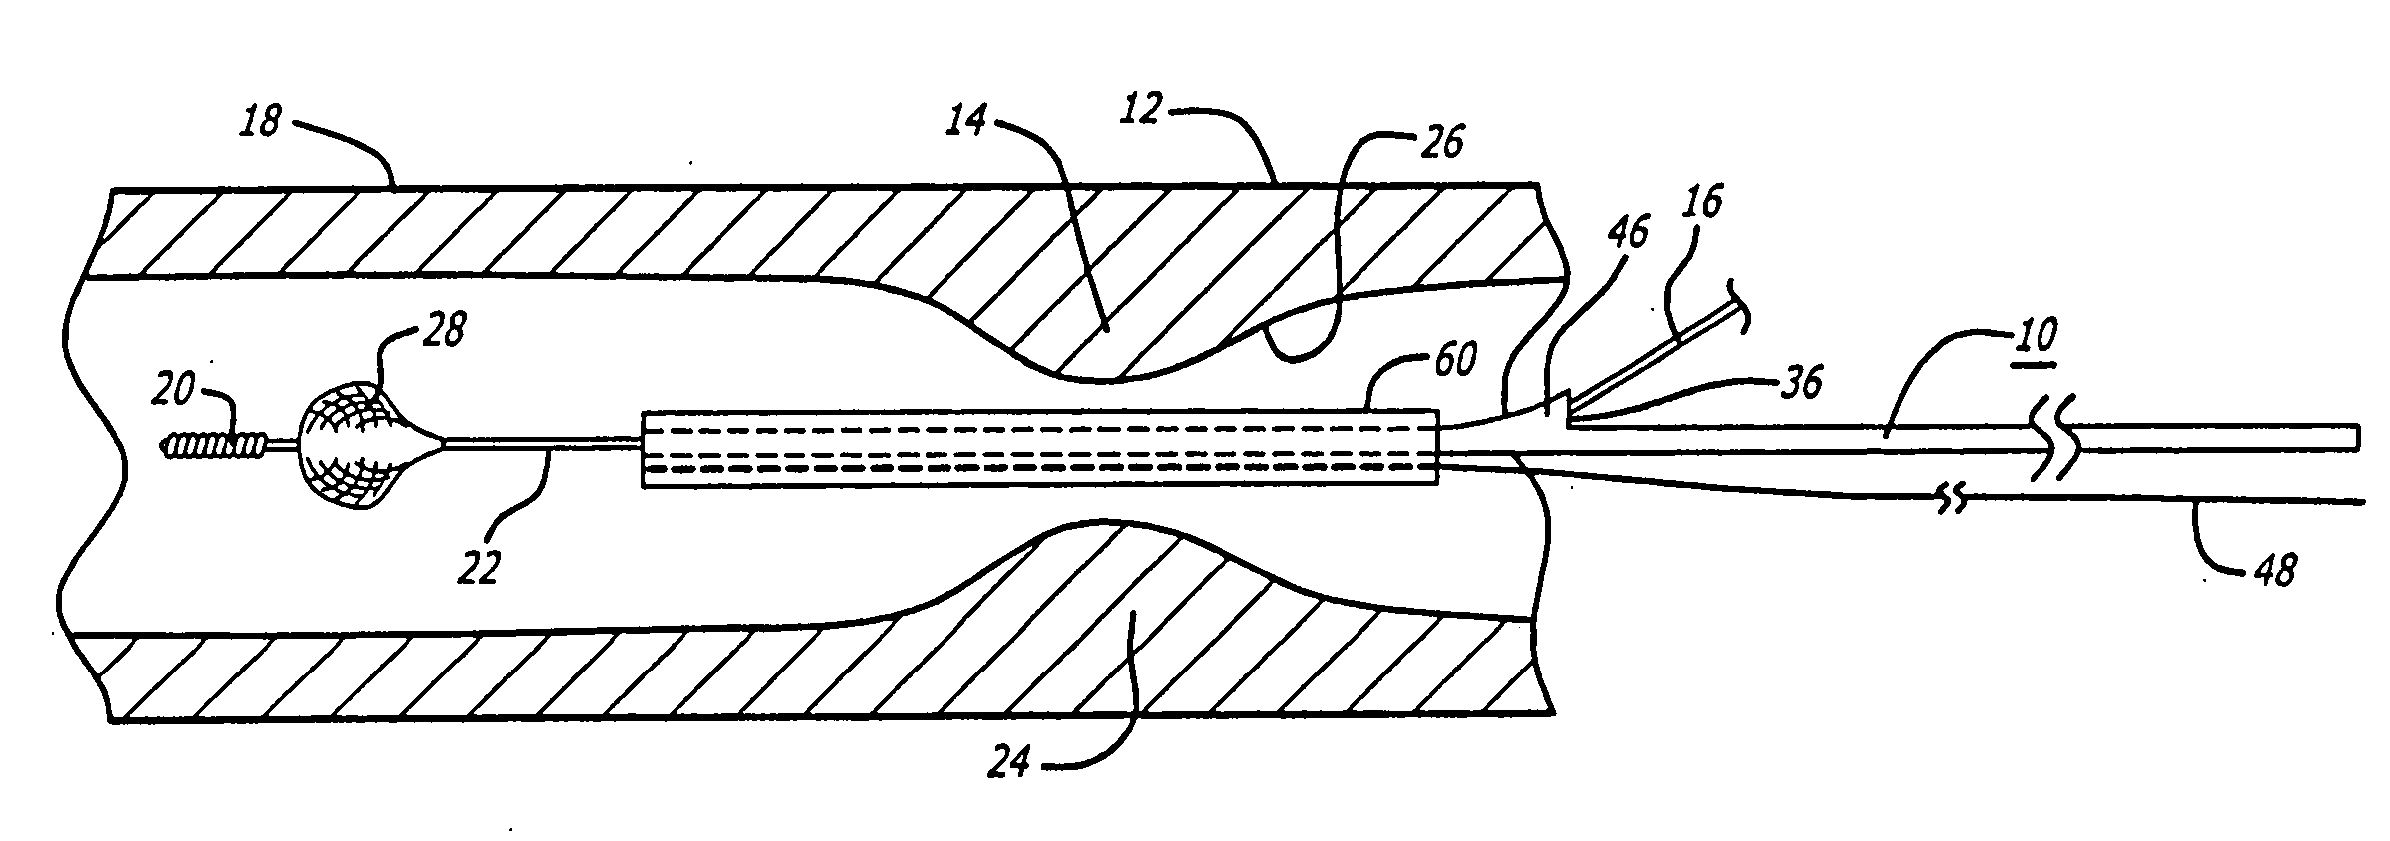 Delivery and recovery system for embolic protection system